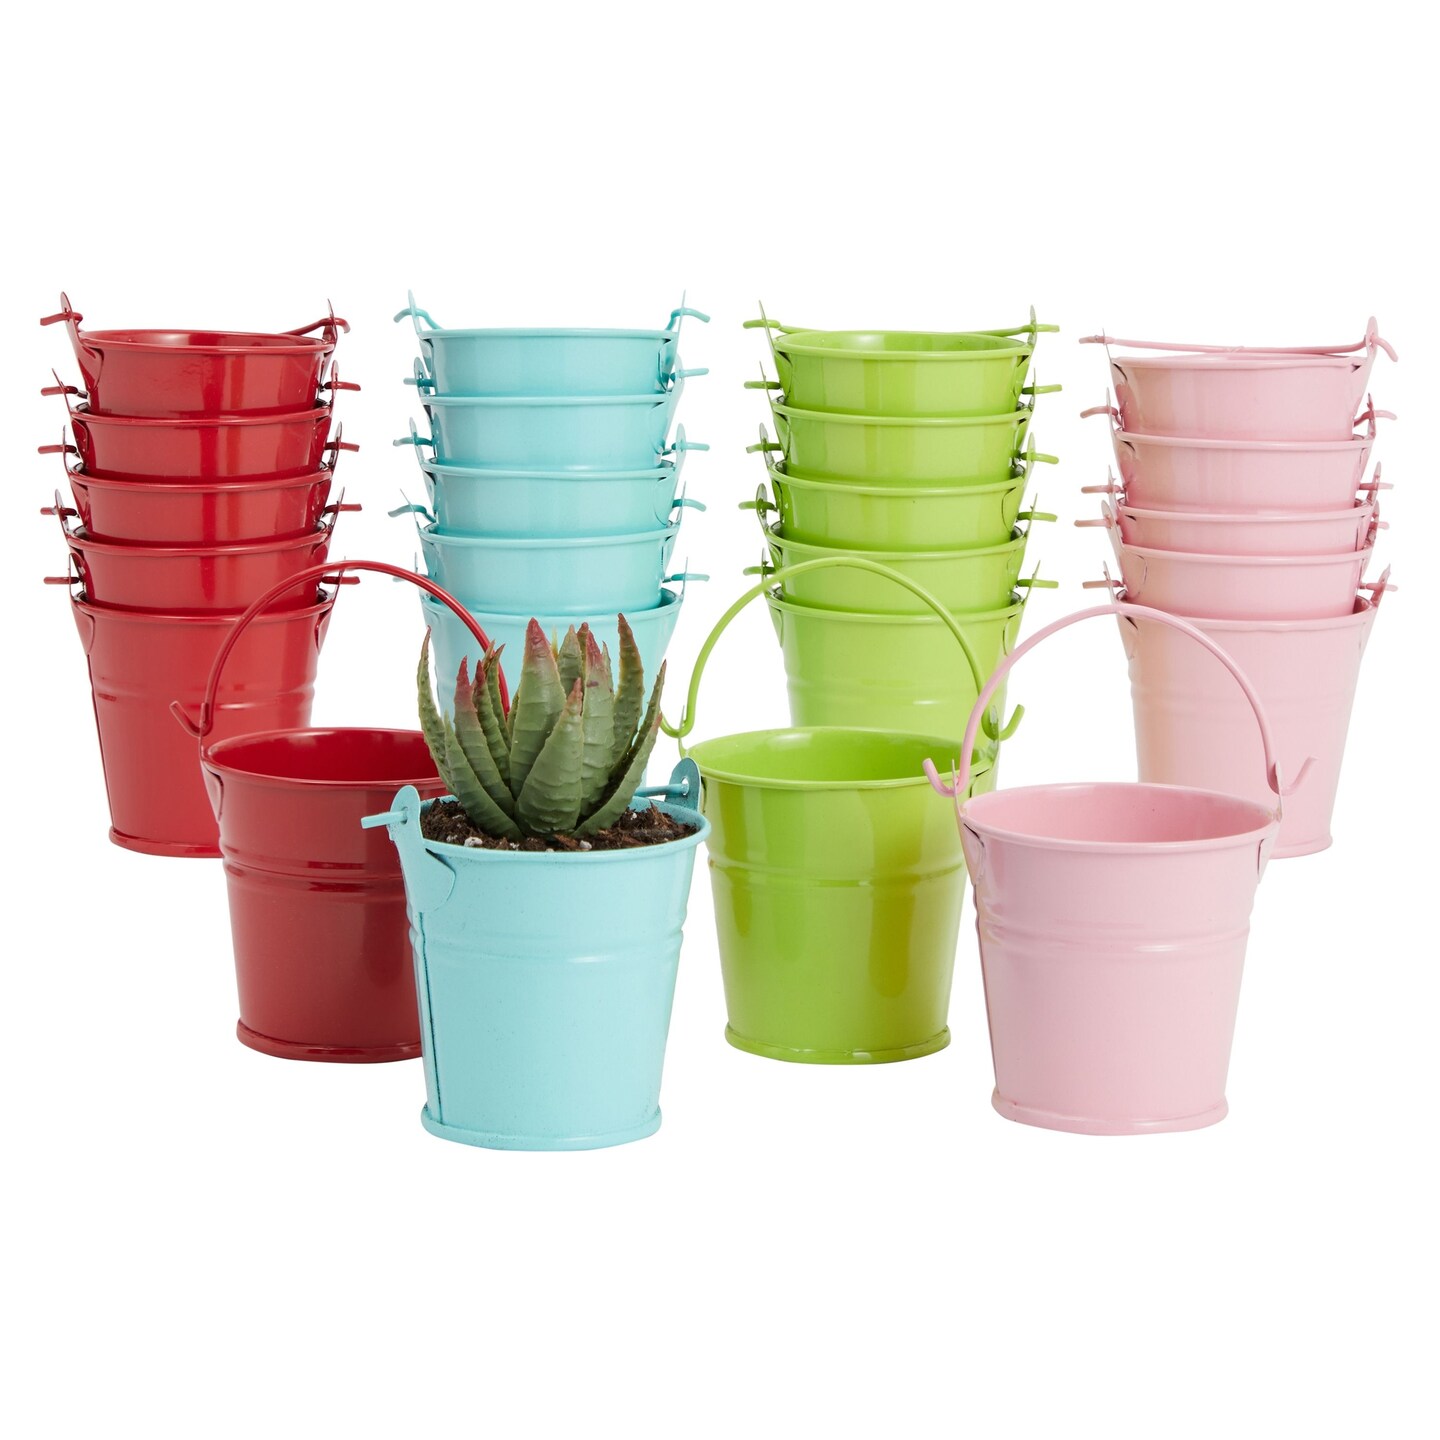 24 Pack Mini Metal Buckets for Crafts, 2-Inch Galvanized Tin Pails for ...